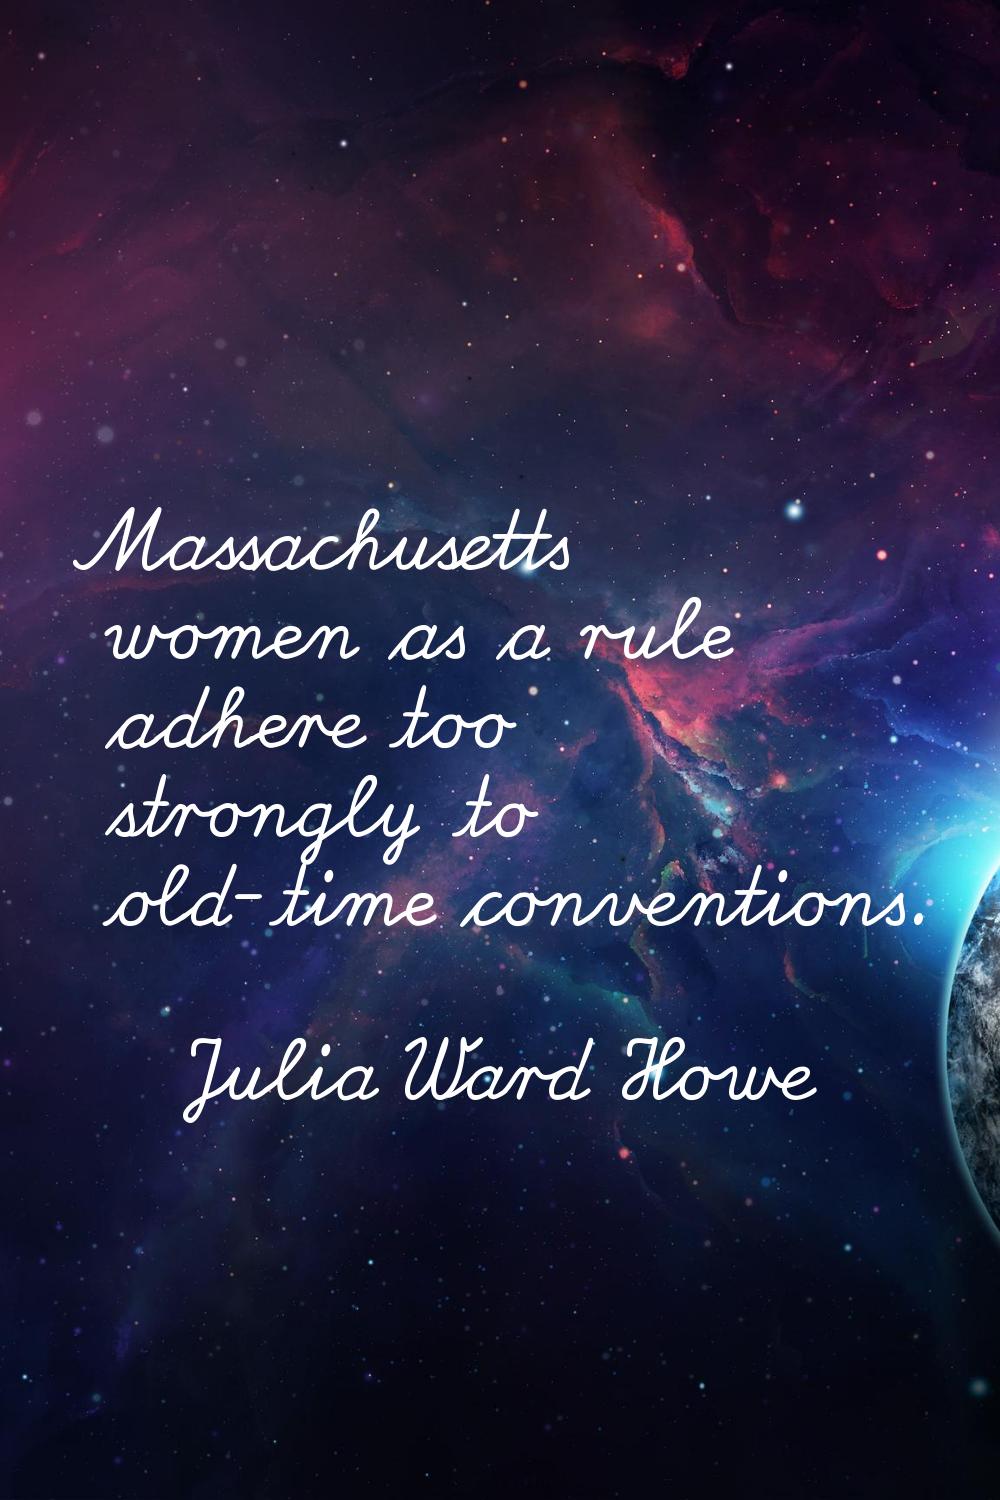 Massachusetts women as a rule adhere too strongly to old-time conventions.